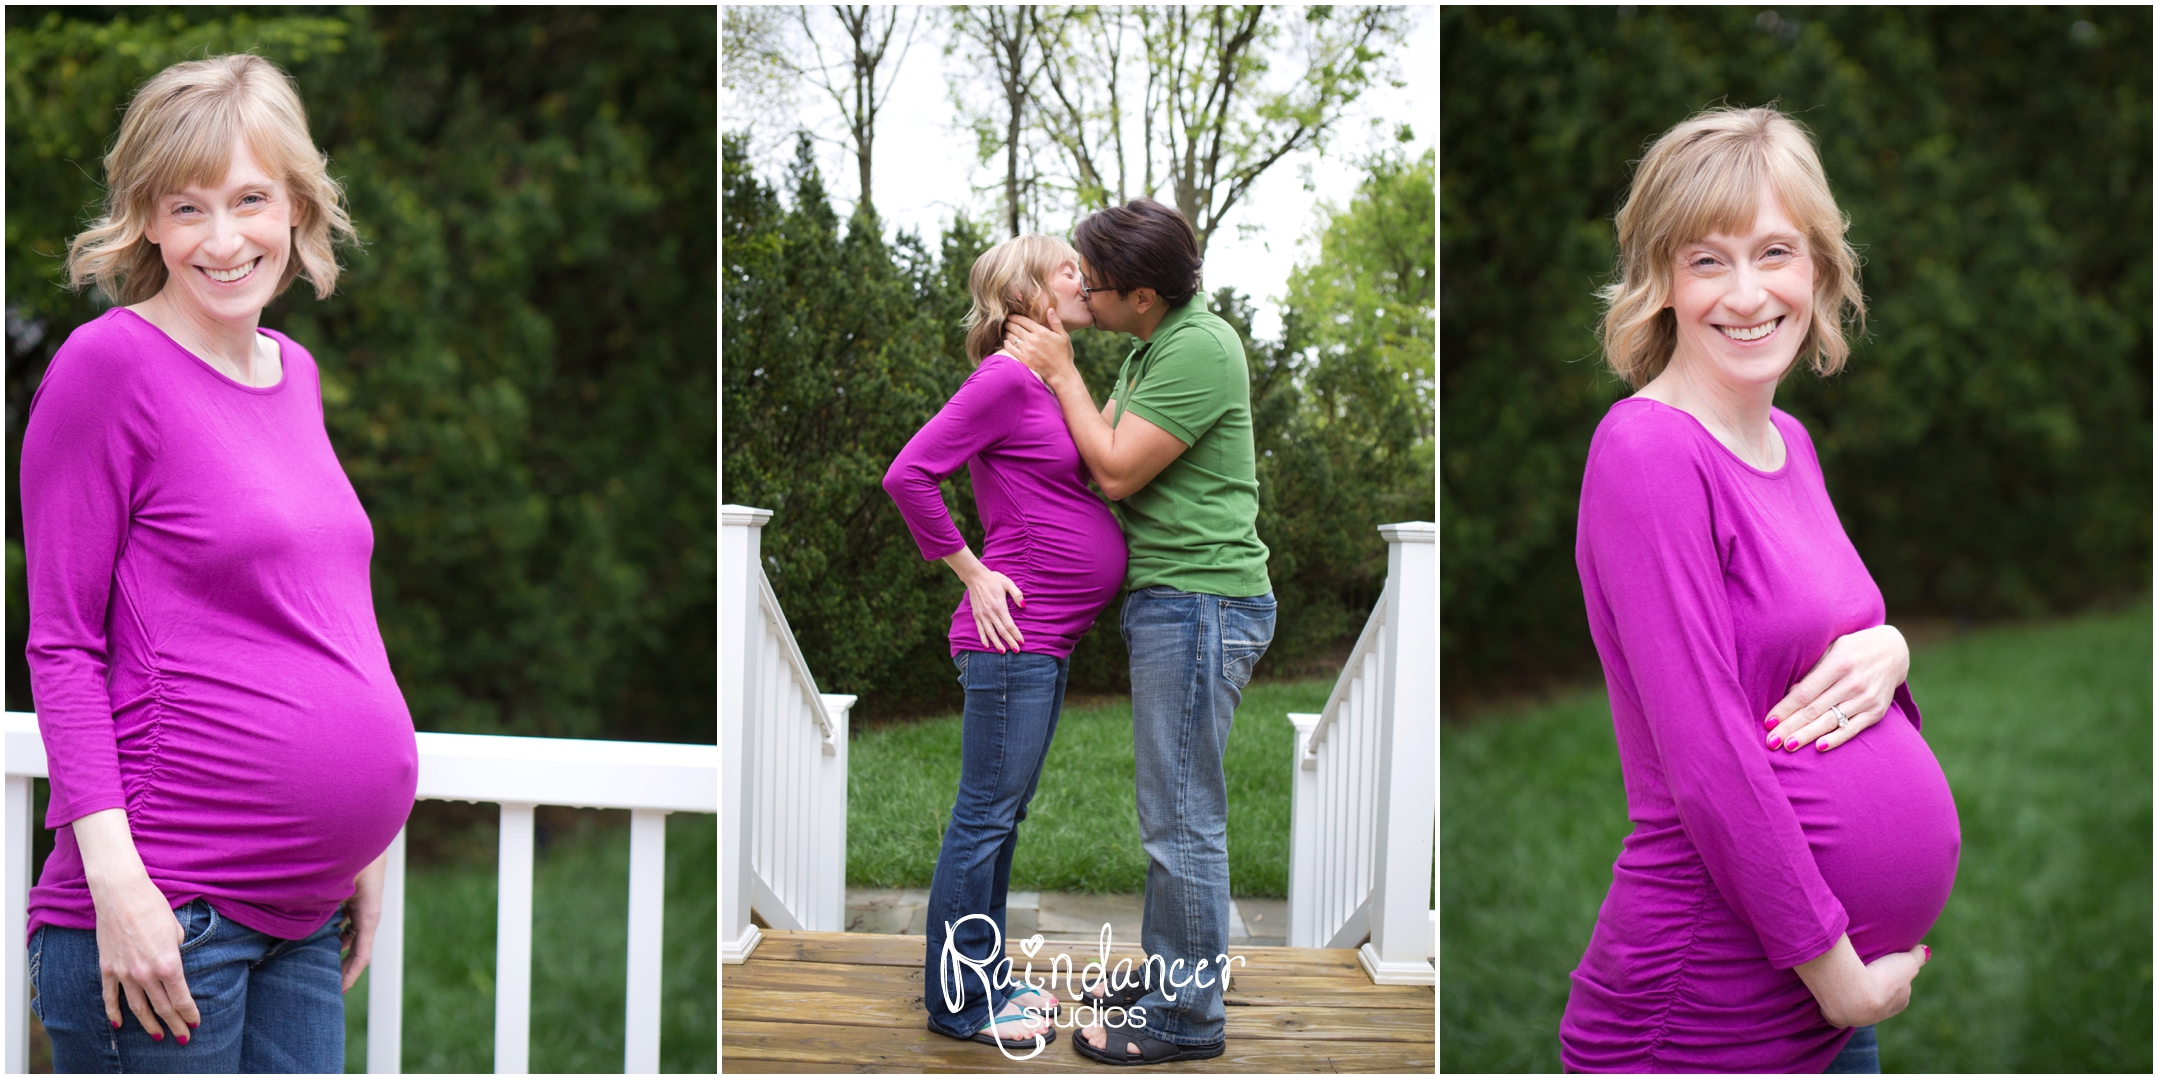 Indianapolis Maternity photographer, Indy maternity photographer, Indianapolis family photographer, Indy family photographer, Indy newborn photographer, Indy maternity photography, Indianapolis maternity photography, Indianapolis children photographer